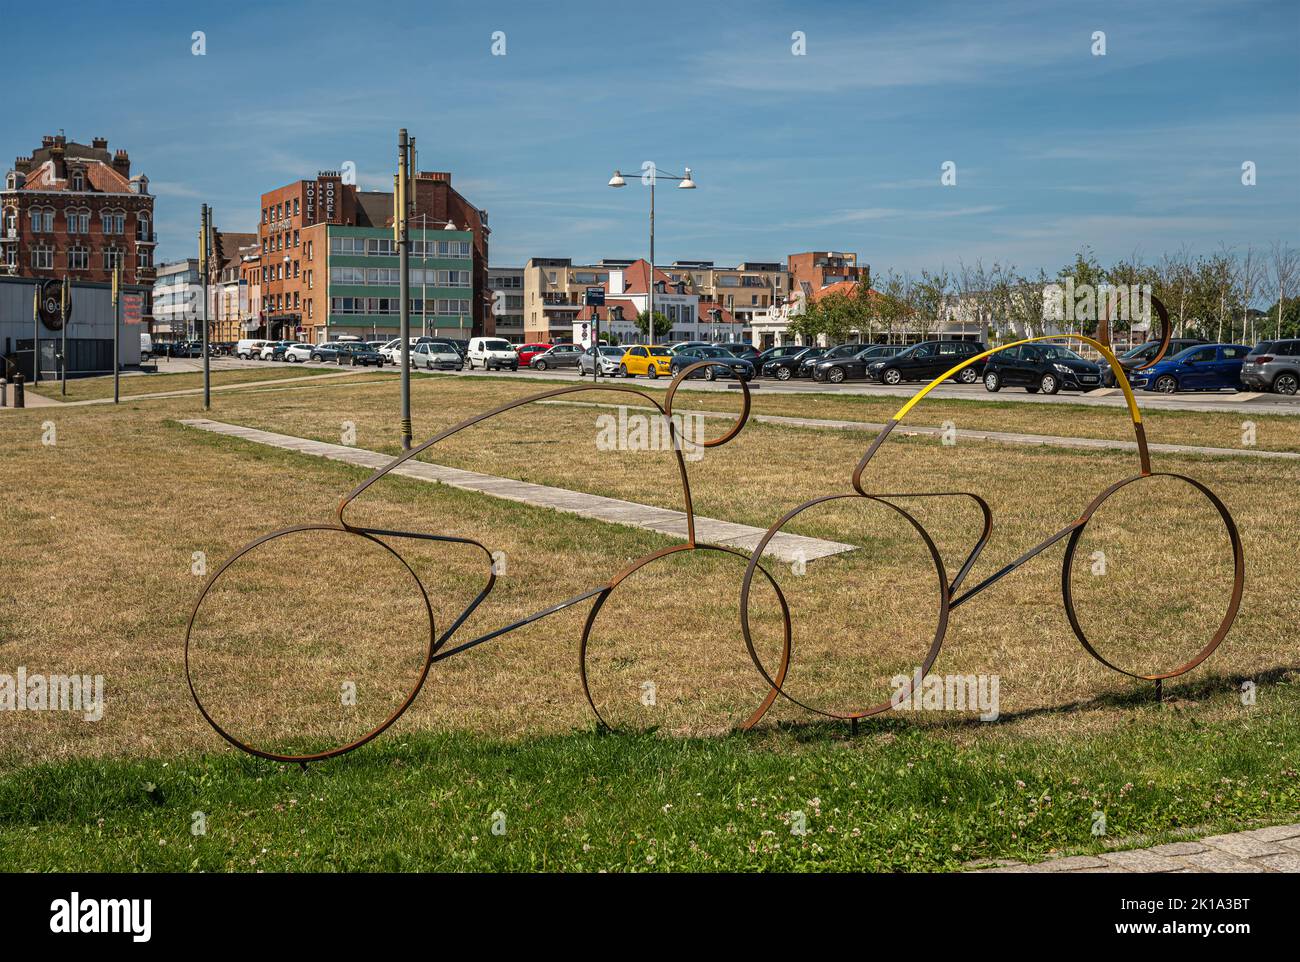 Europe, France, Dunkerque - July 9, 2022: Tour de France memorabilia. 2 rusted bicycle with rider profiles, 1 yellow shirt, on lawn of Place du Mynck Stock Photo